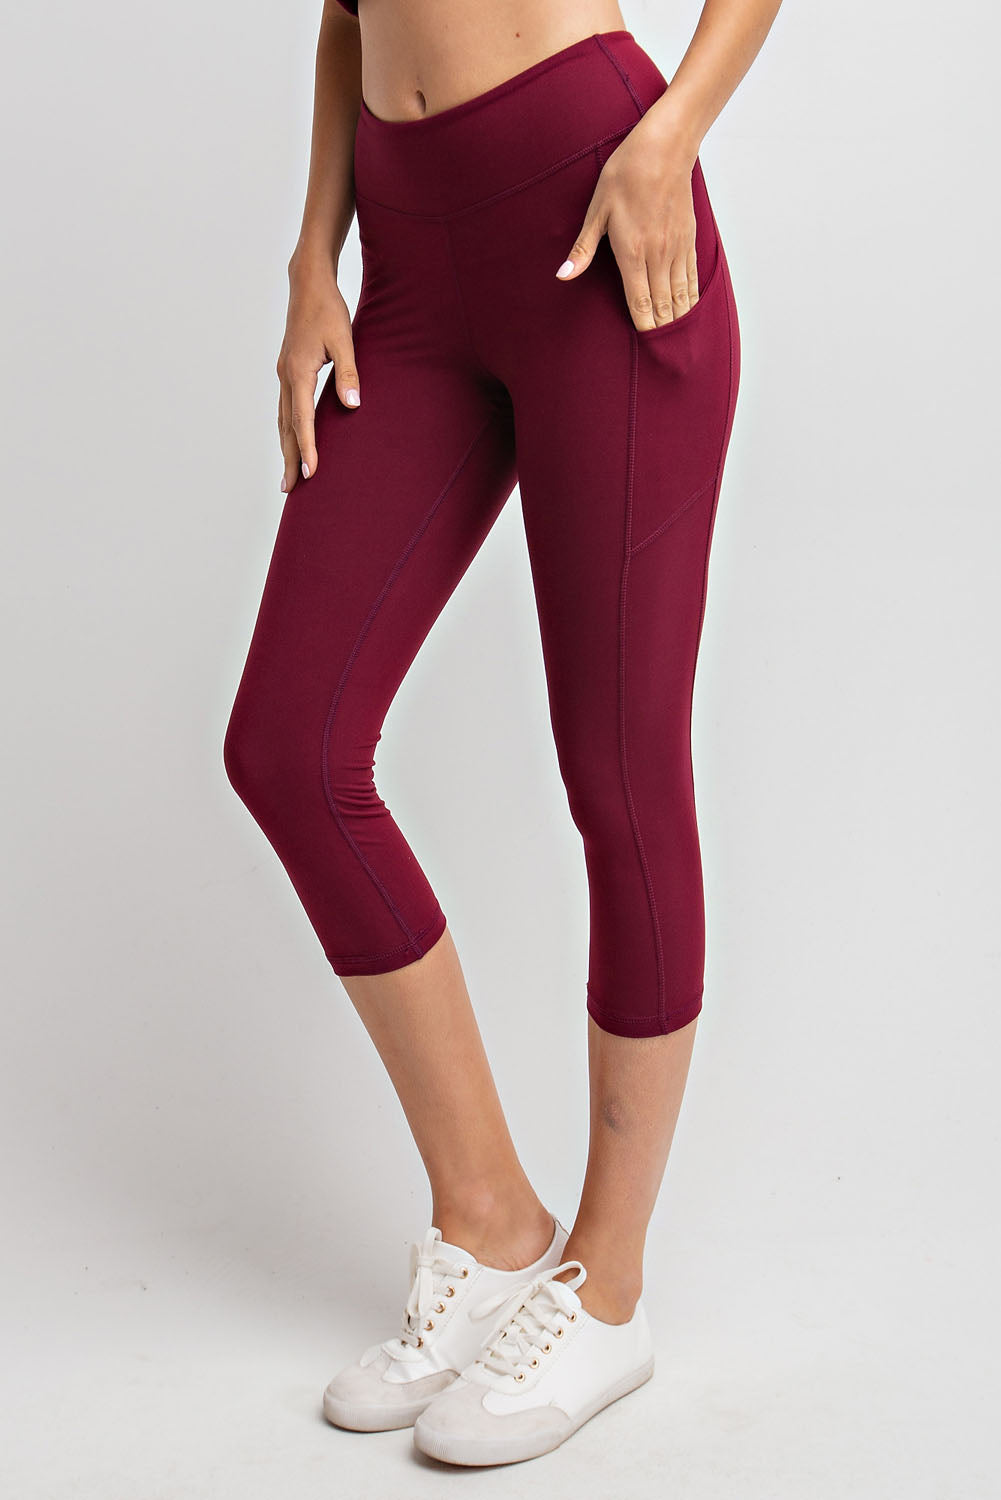 Buttery Smooth Burgundy Christmas Ornaments Plus Size Leggings